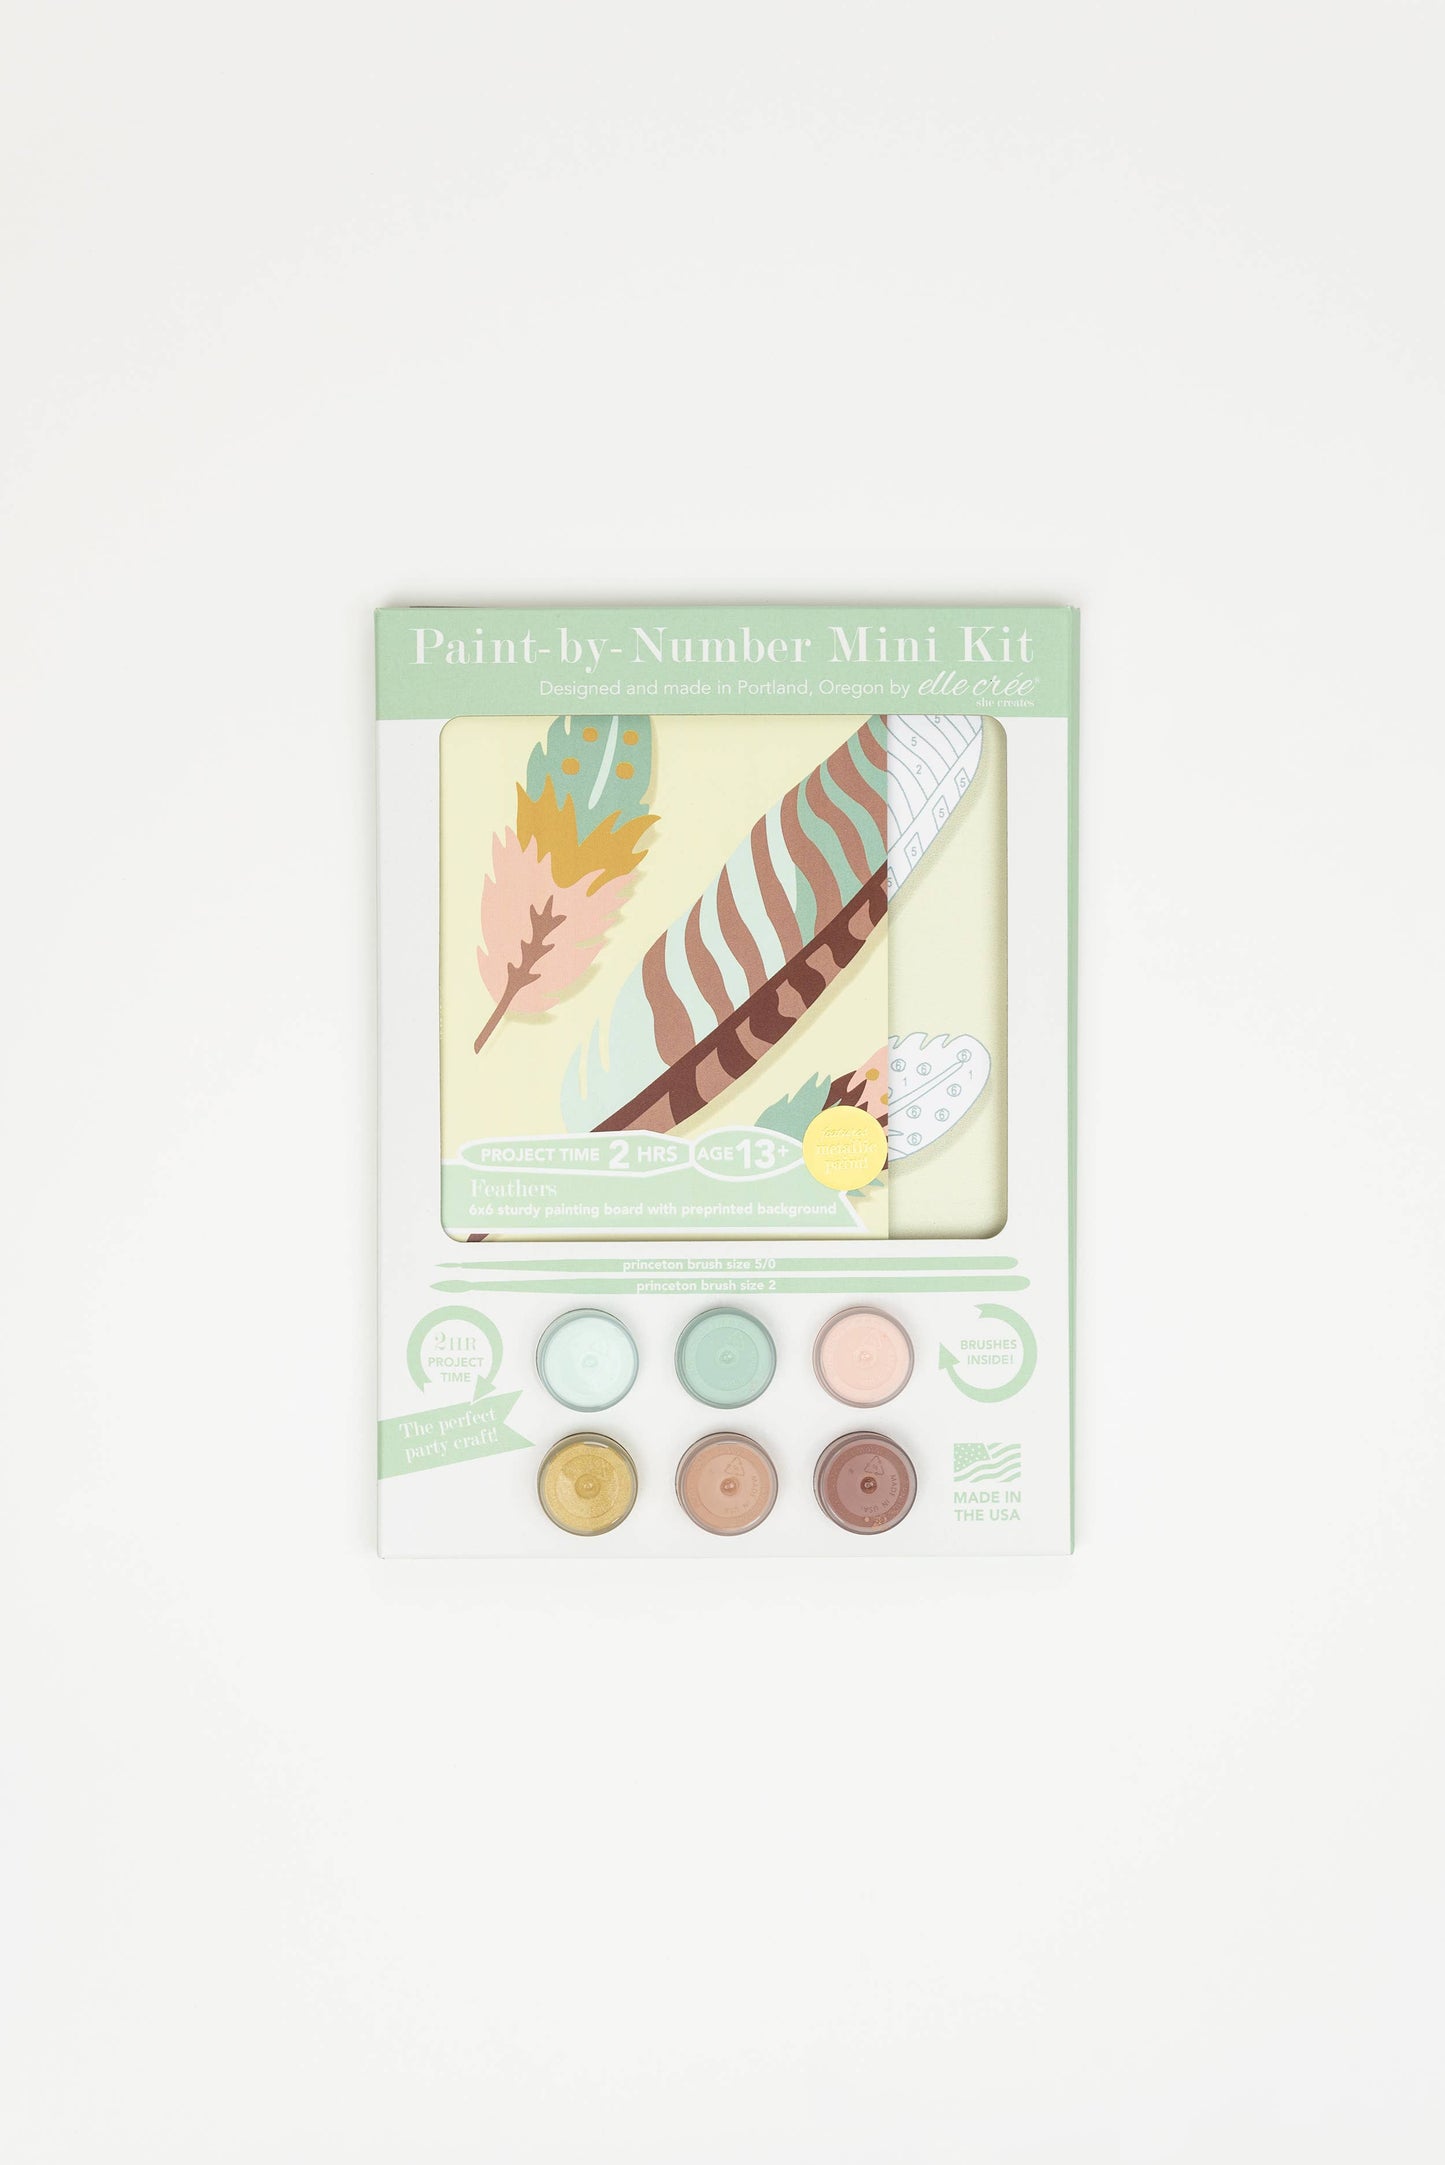 Feathers MINI Paint-by-Number Kit